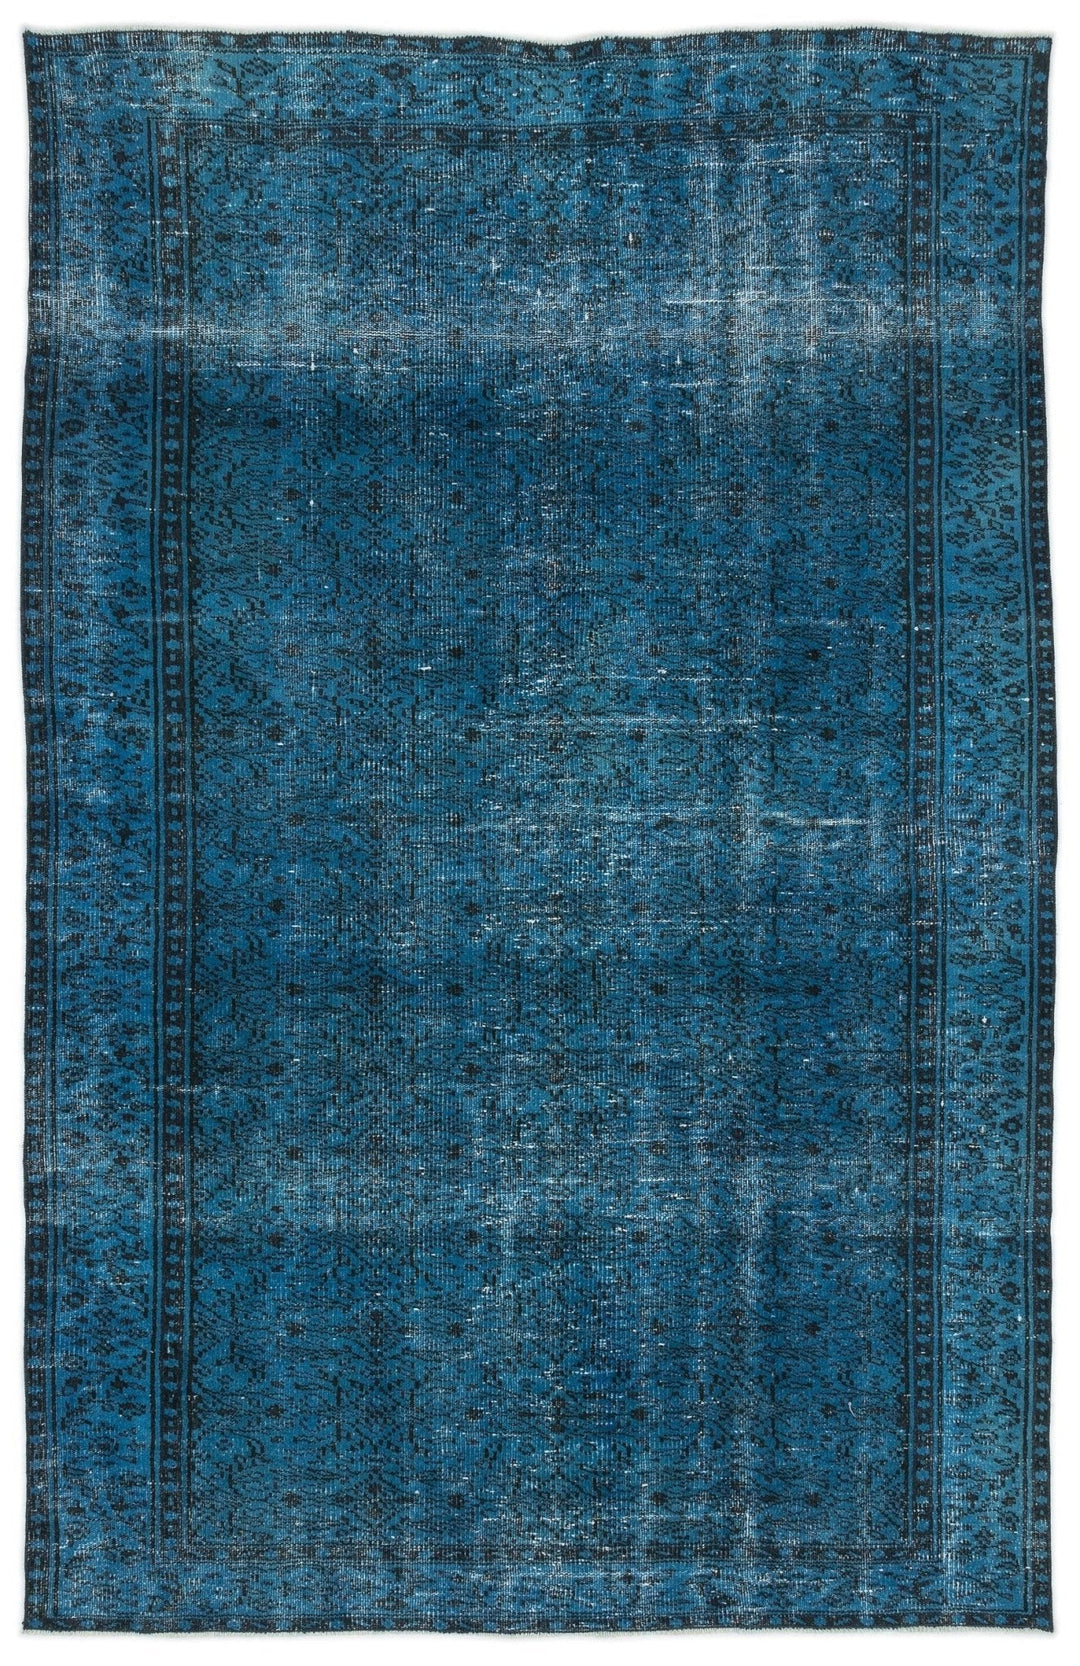 Athens 13133 Blue Tumbled Wool Hand Woven Carpet 172 x 262